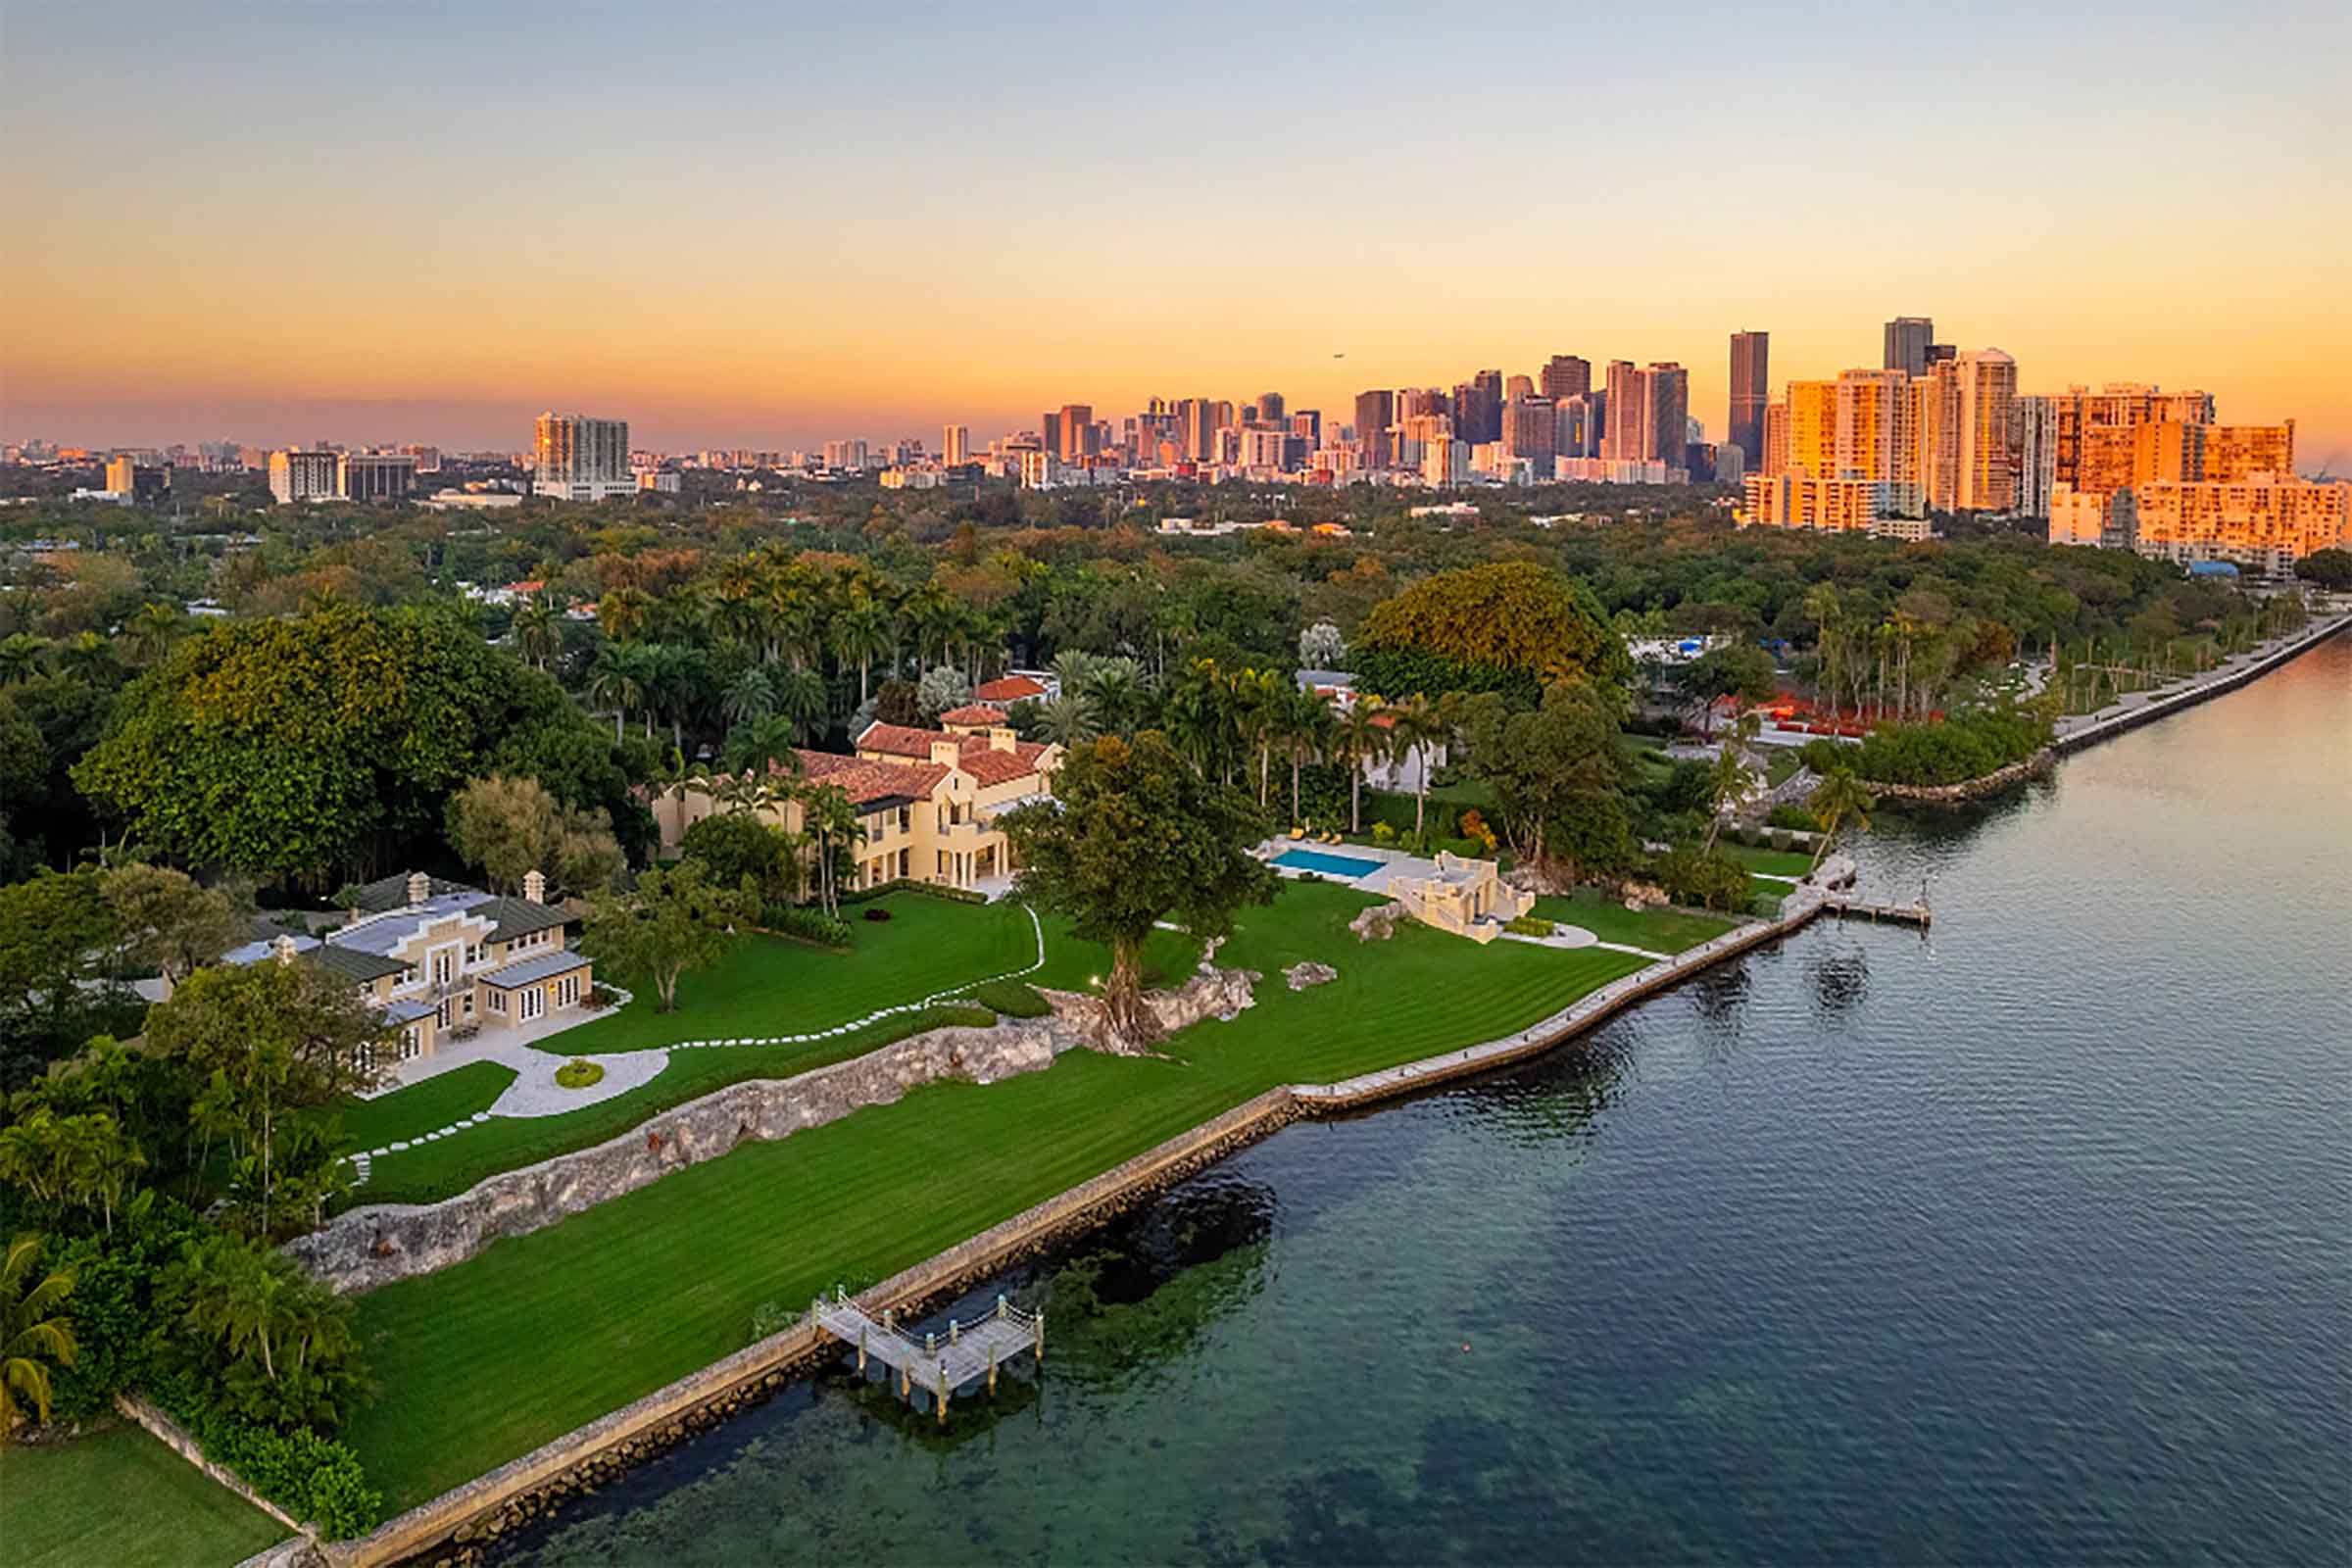 Record-Breaking Sale: Ken Griffin Pays $107 Million For Adrienne Arscht’s Coconut Grove Waterfront Compound